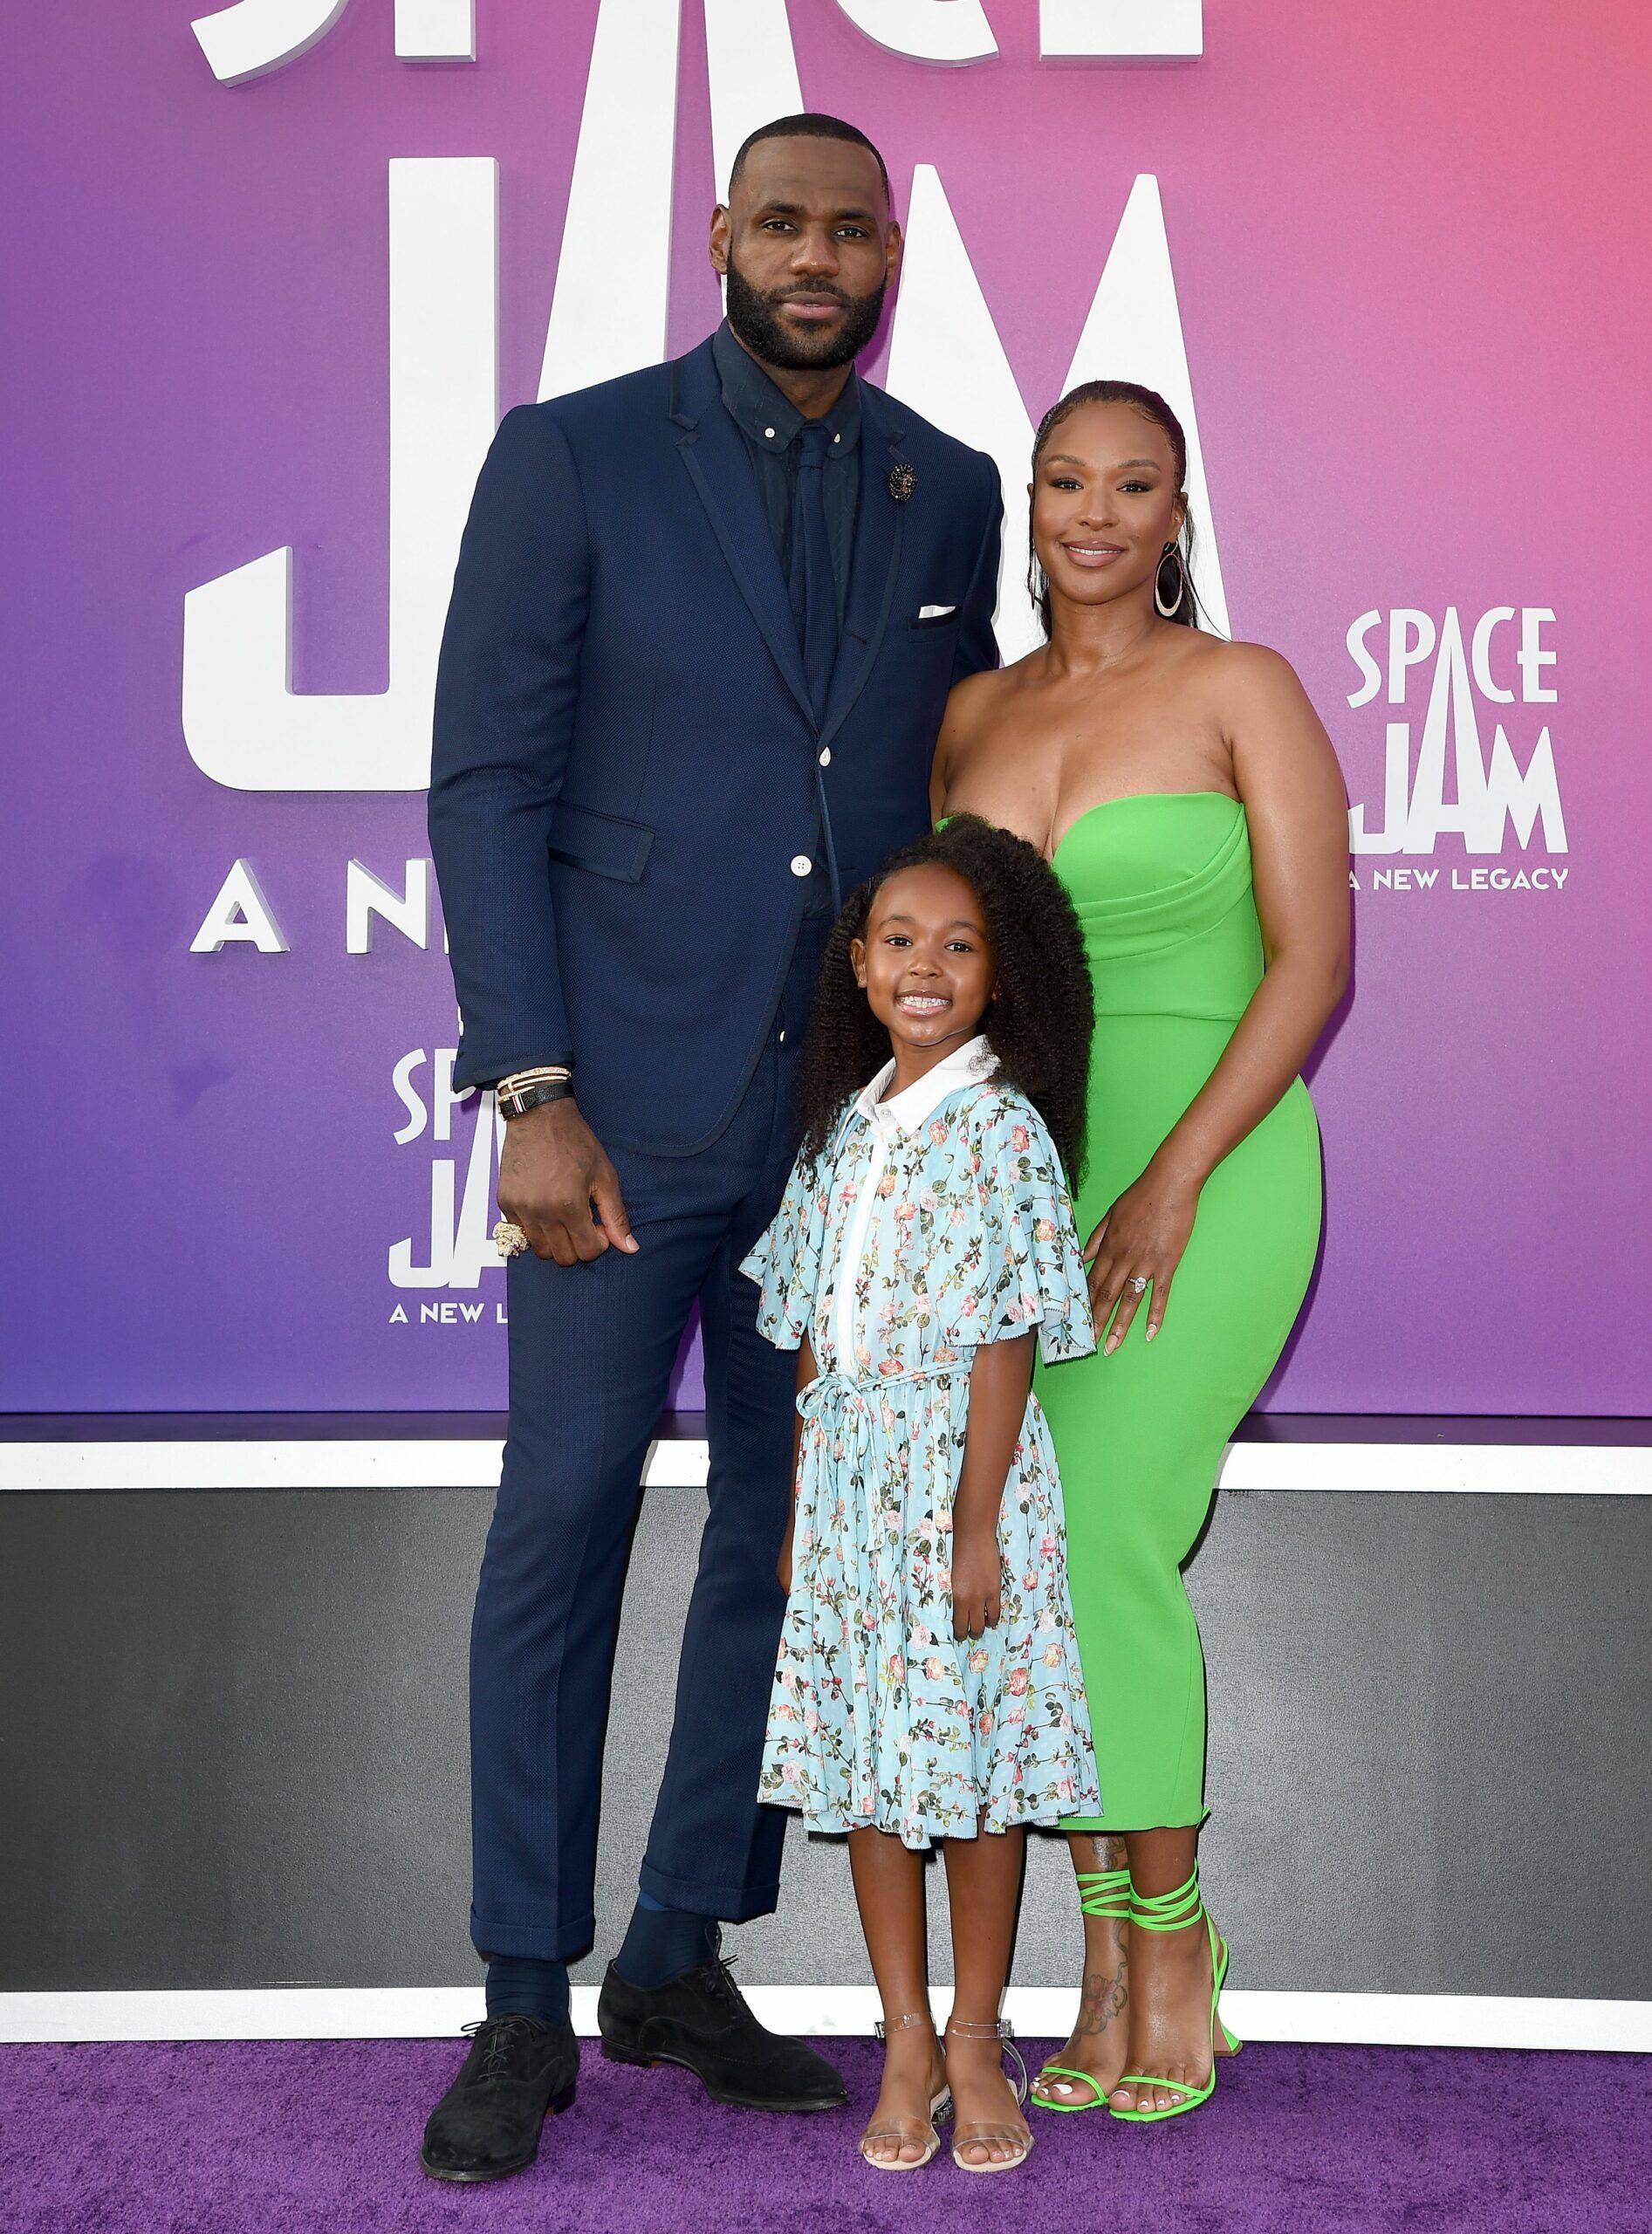 Lebron James at the Space Jam: A New Legacy Premiere